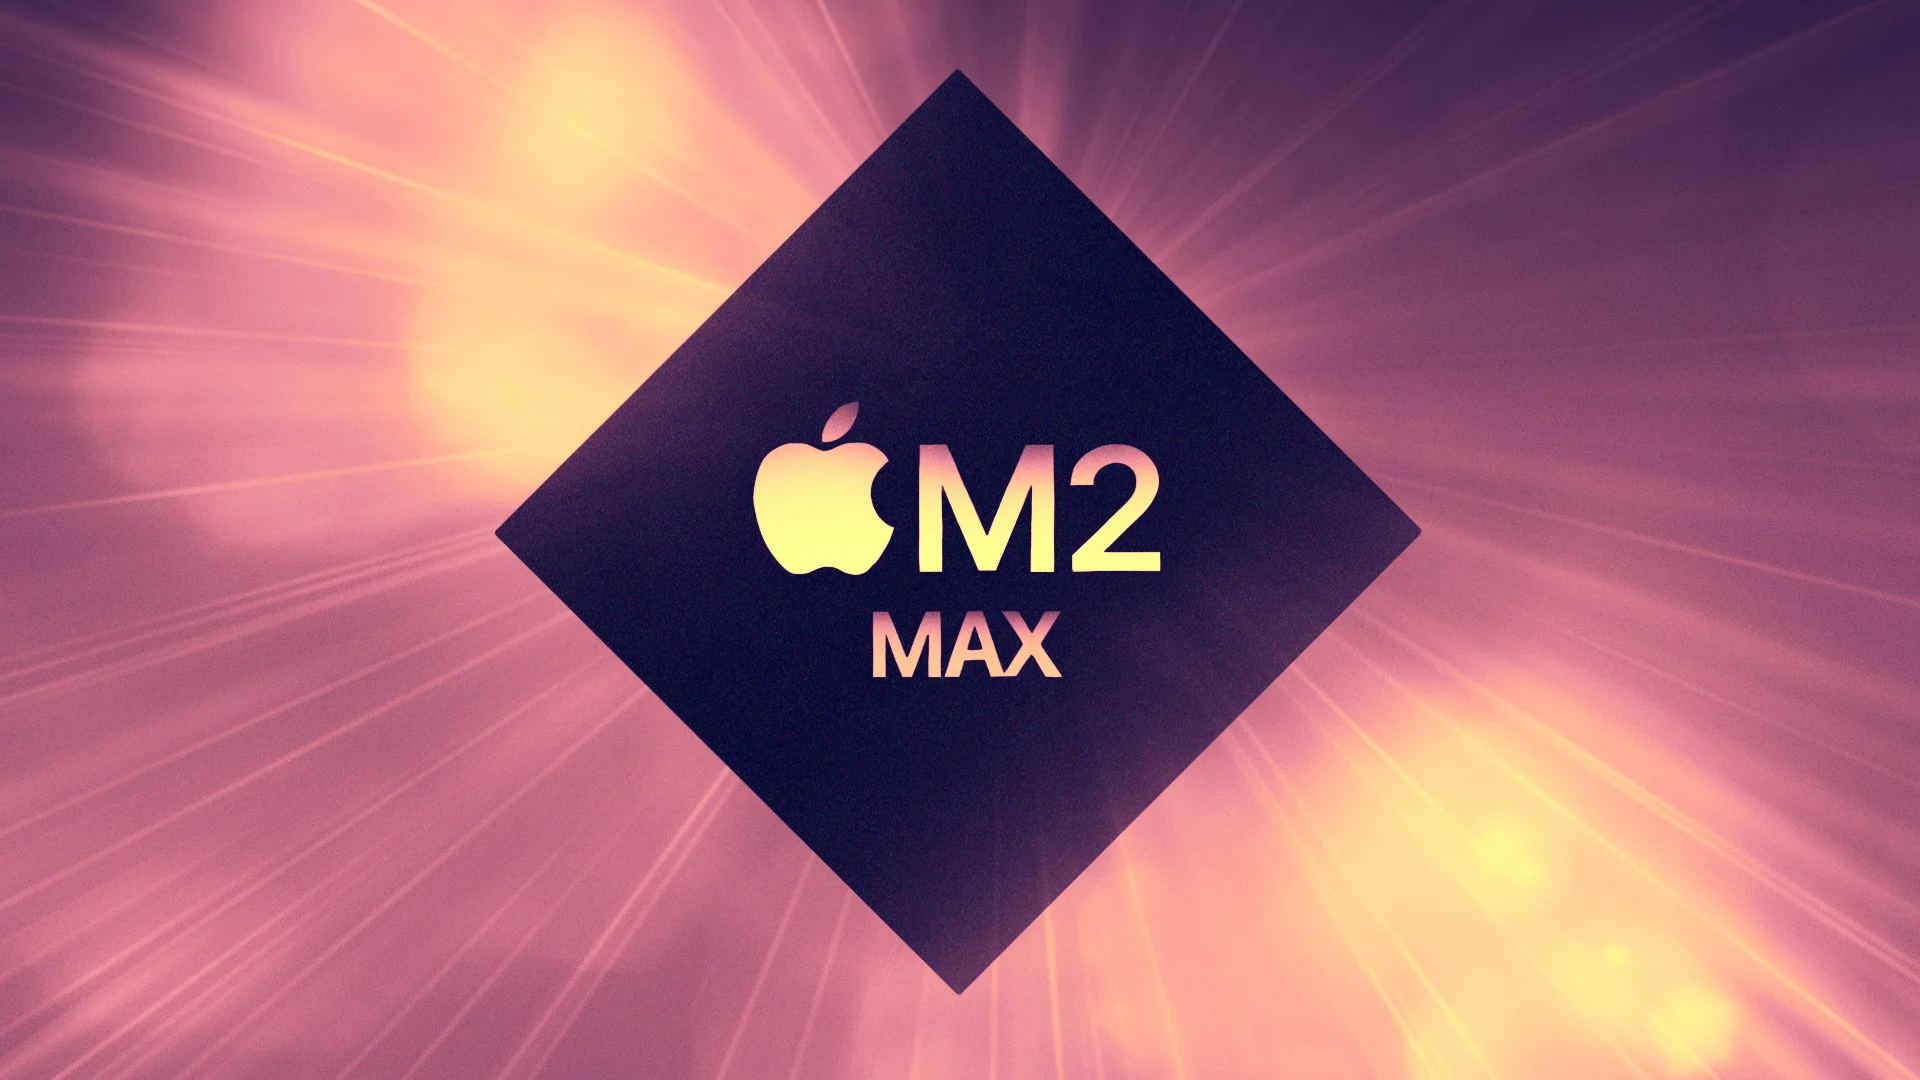 New Apple M2 Max chip spotted on Geekbench